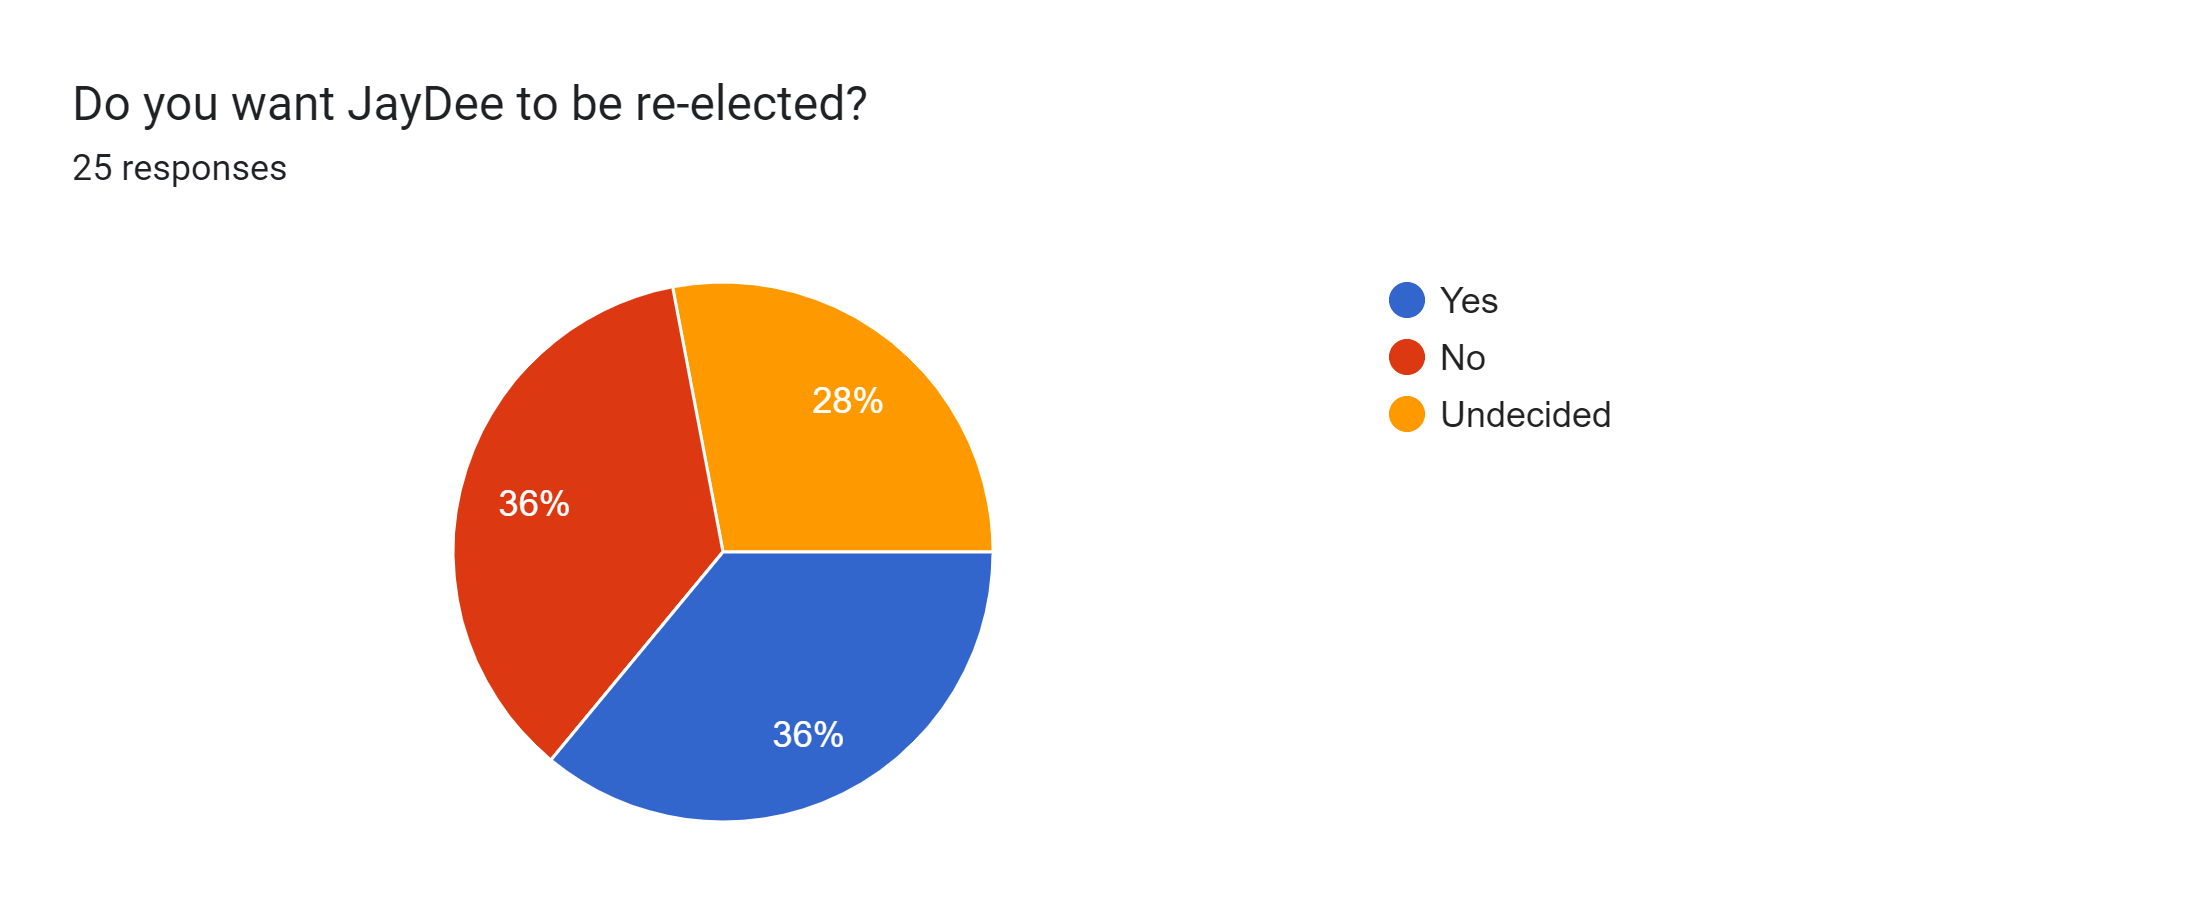 Forms response chart. Question title: Do you want JayDee to be re-elected?. Number of responses: 25 responses.